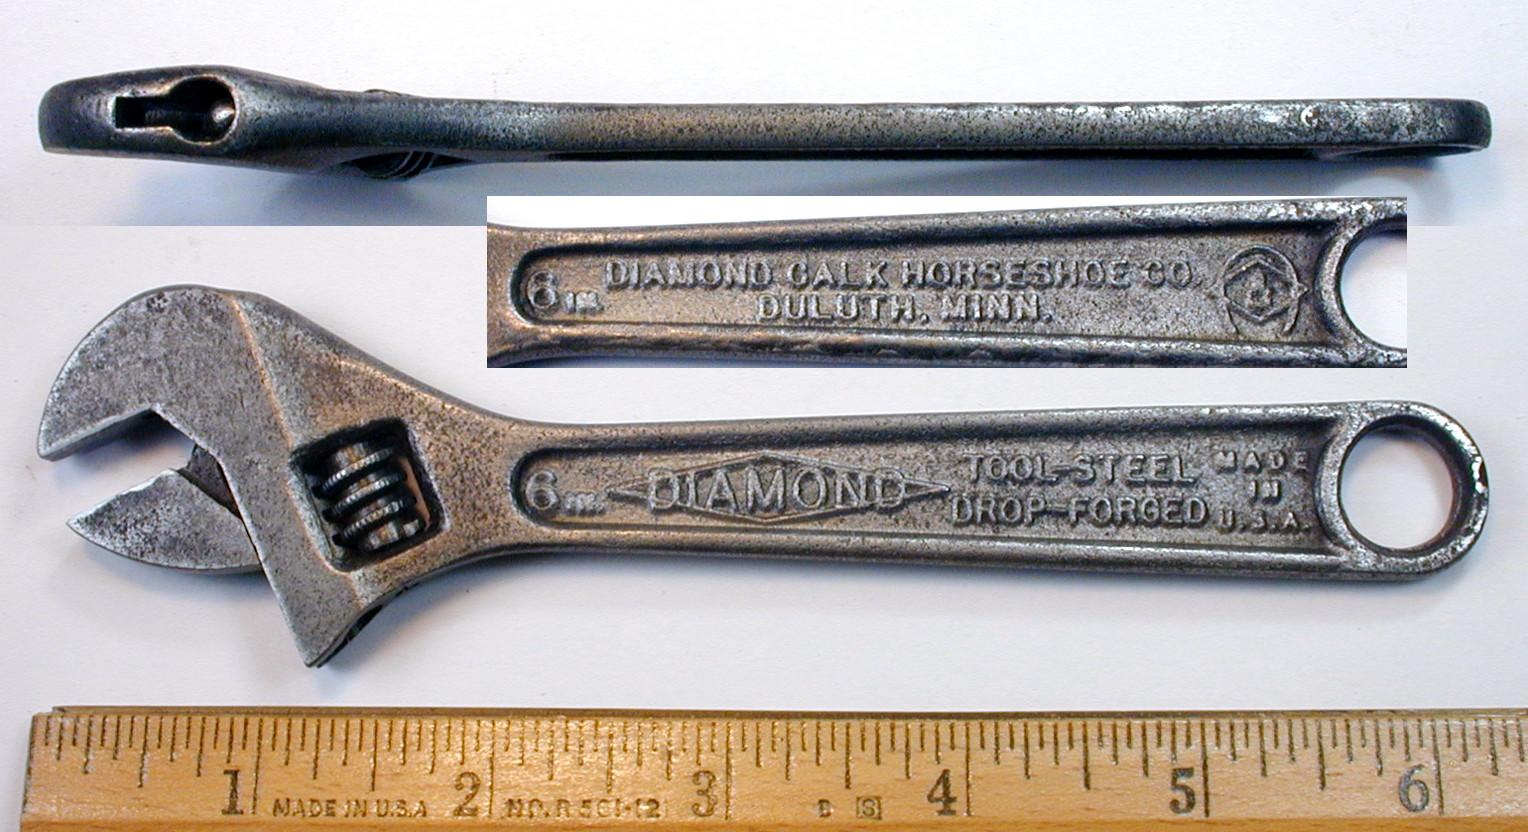 Diamond, Details about   Lot of 7 USA Scredriver  Channellock Crescent